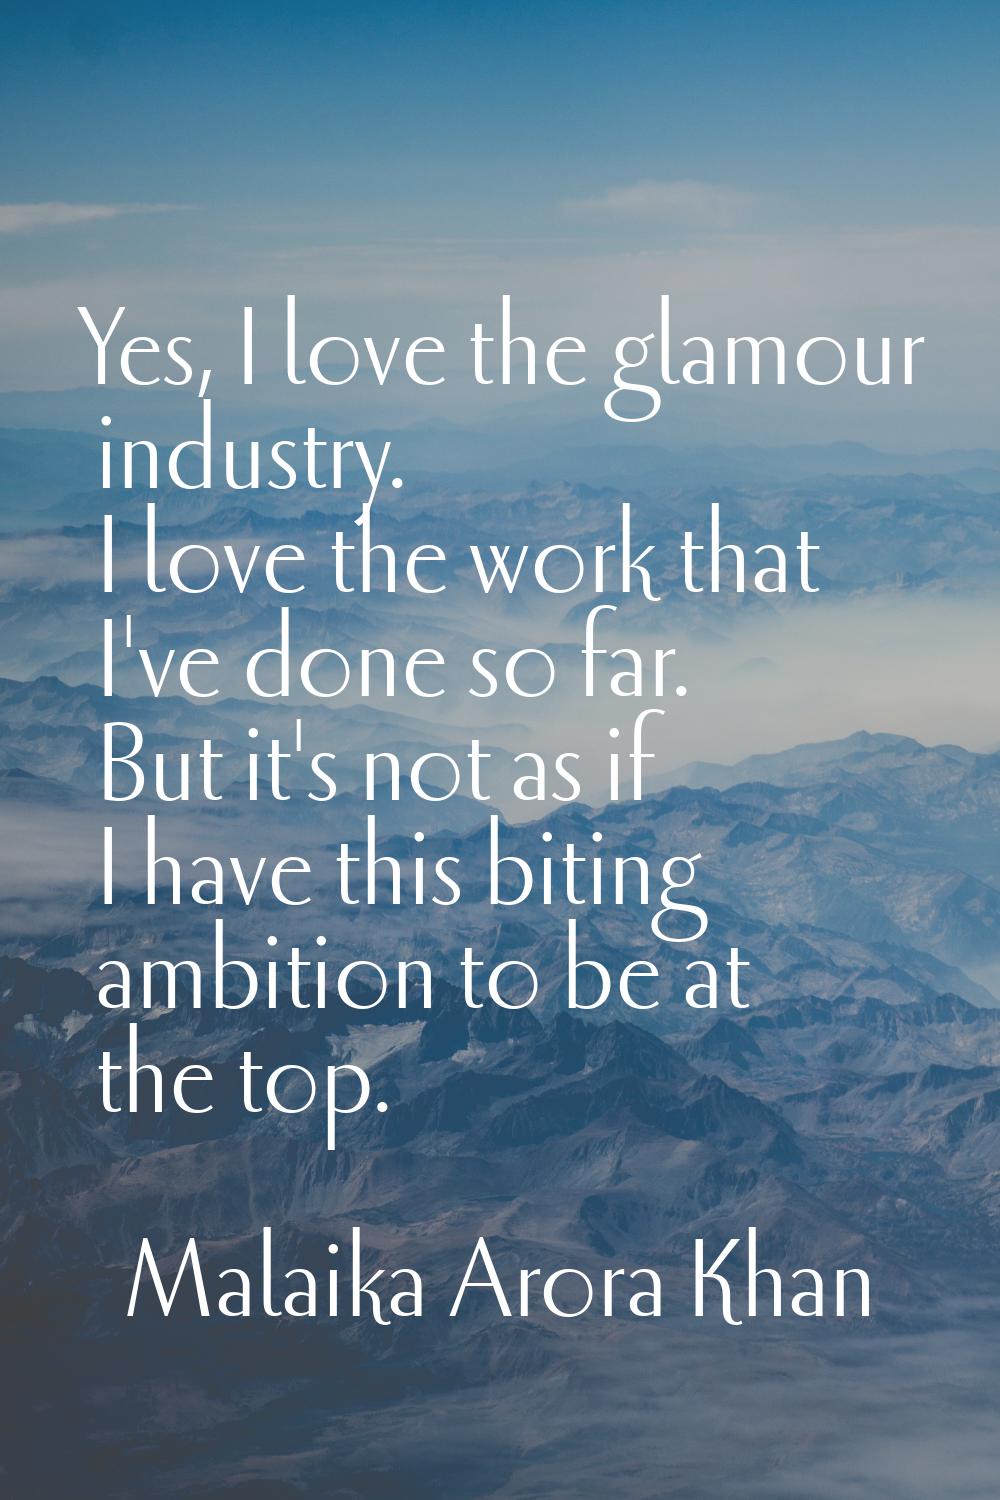 Yes, I love the glamour industry. I love the work that I've done so far. But it's not as if I have 